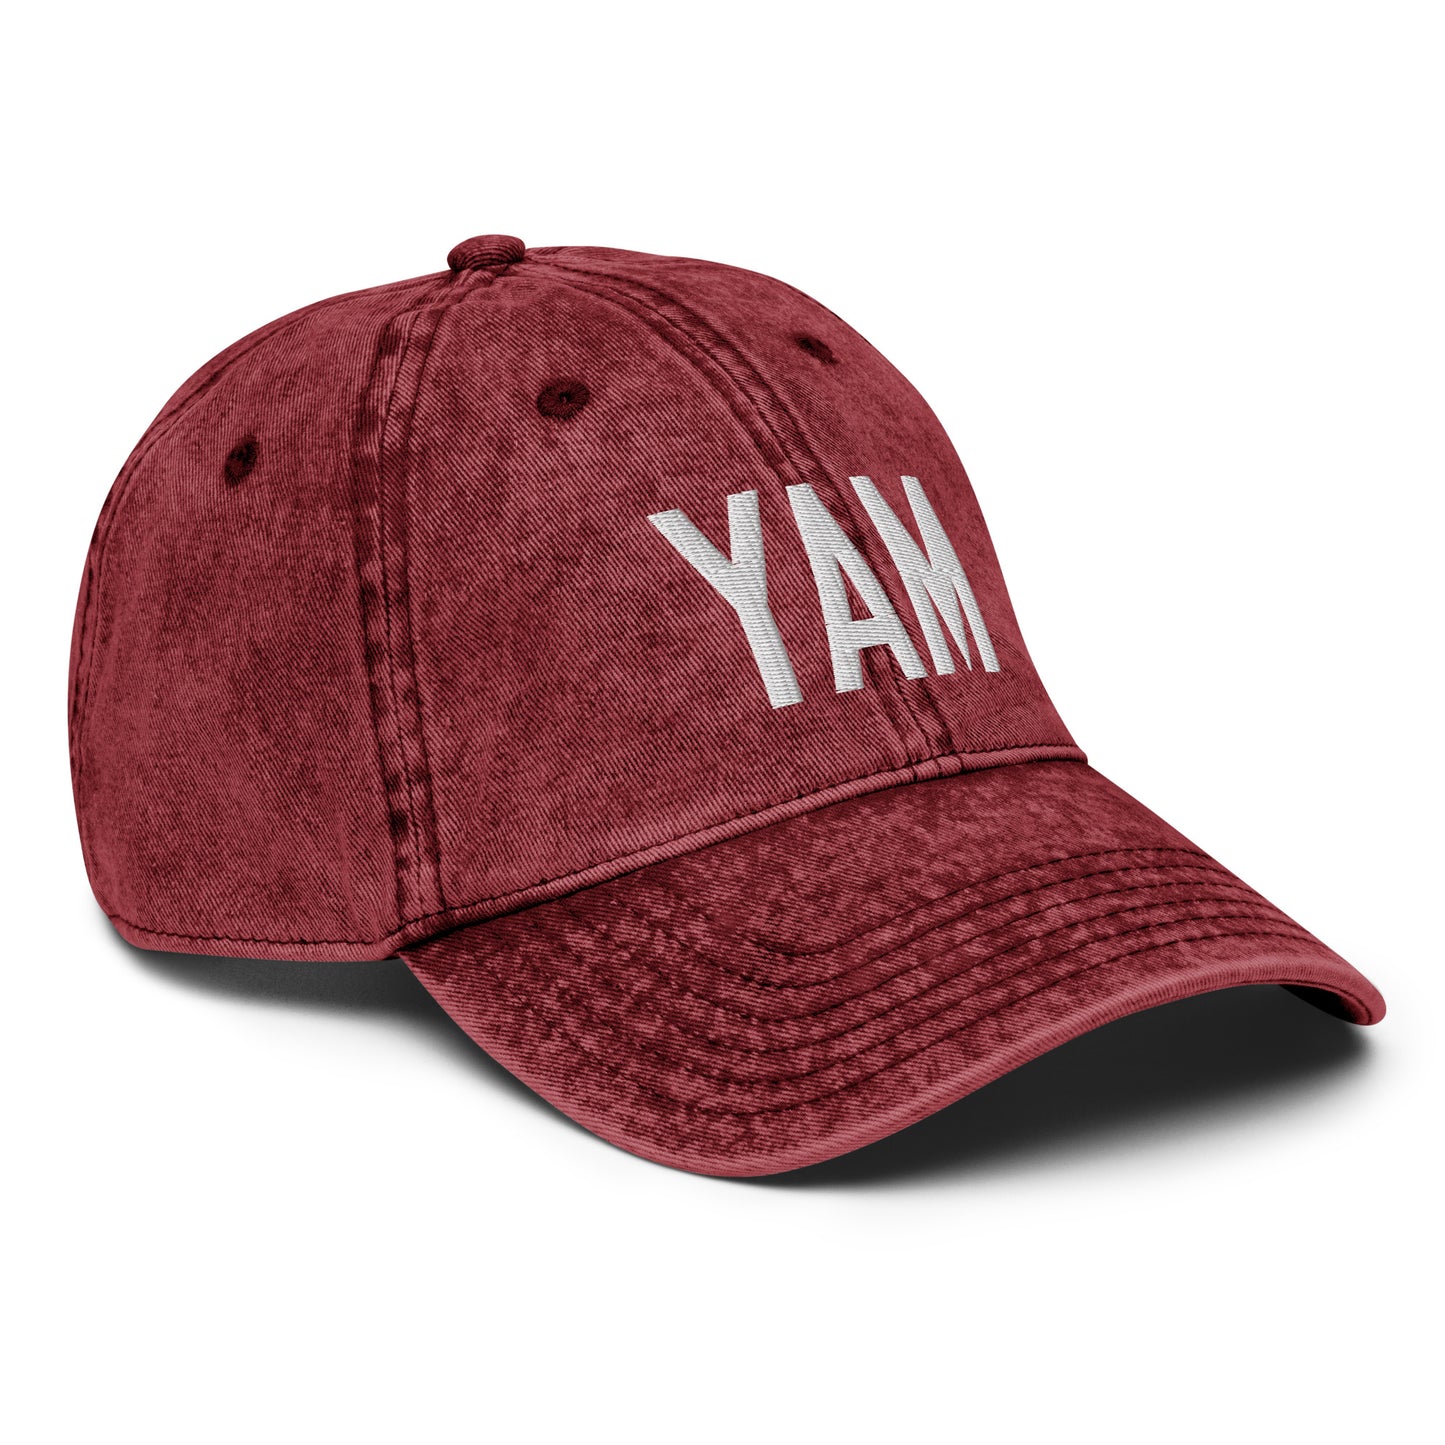 Airport Code Twill Cap - White • YAM Sault-Ste-Marie • YHM Designs - Image 21